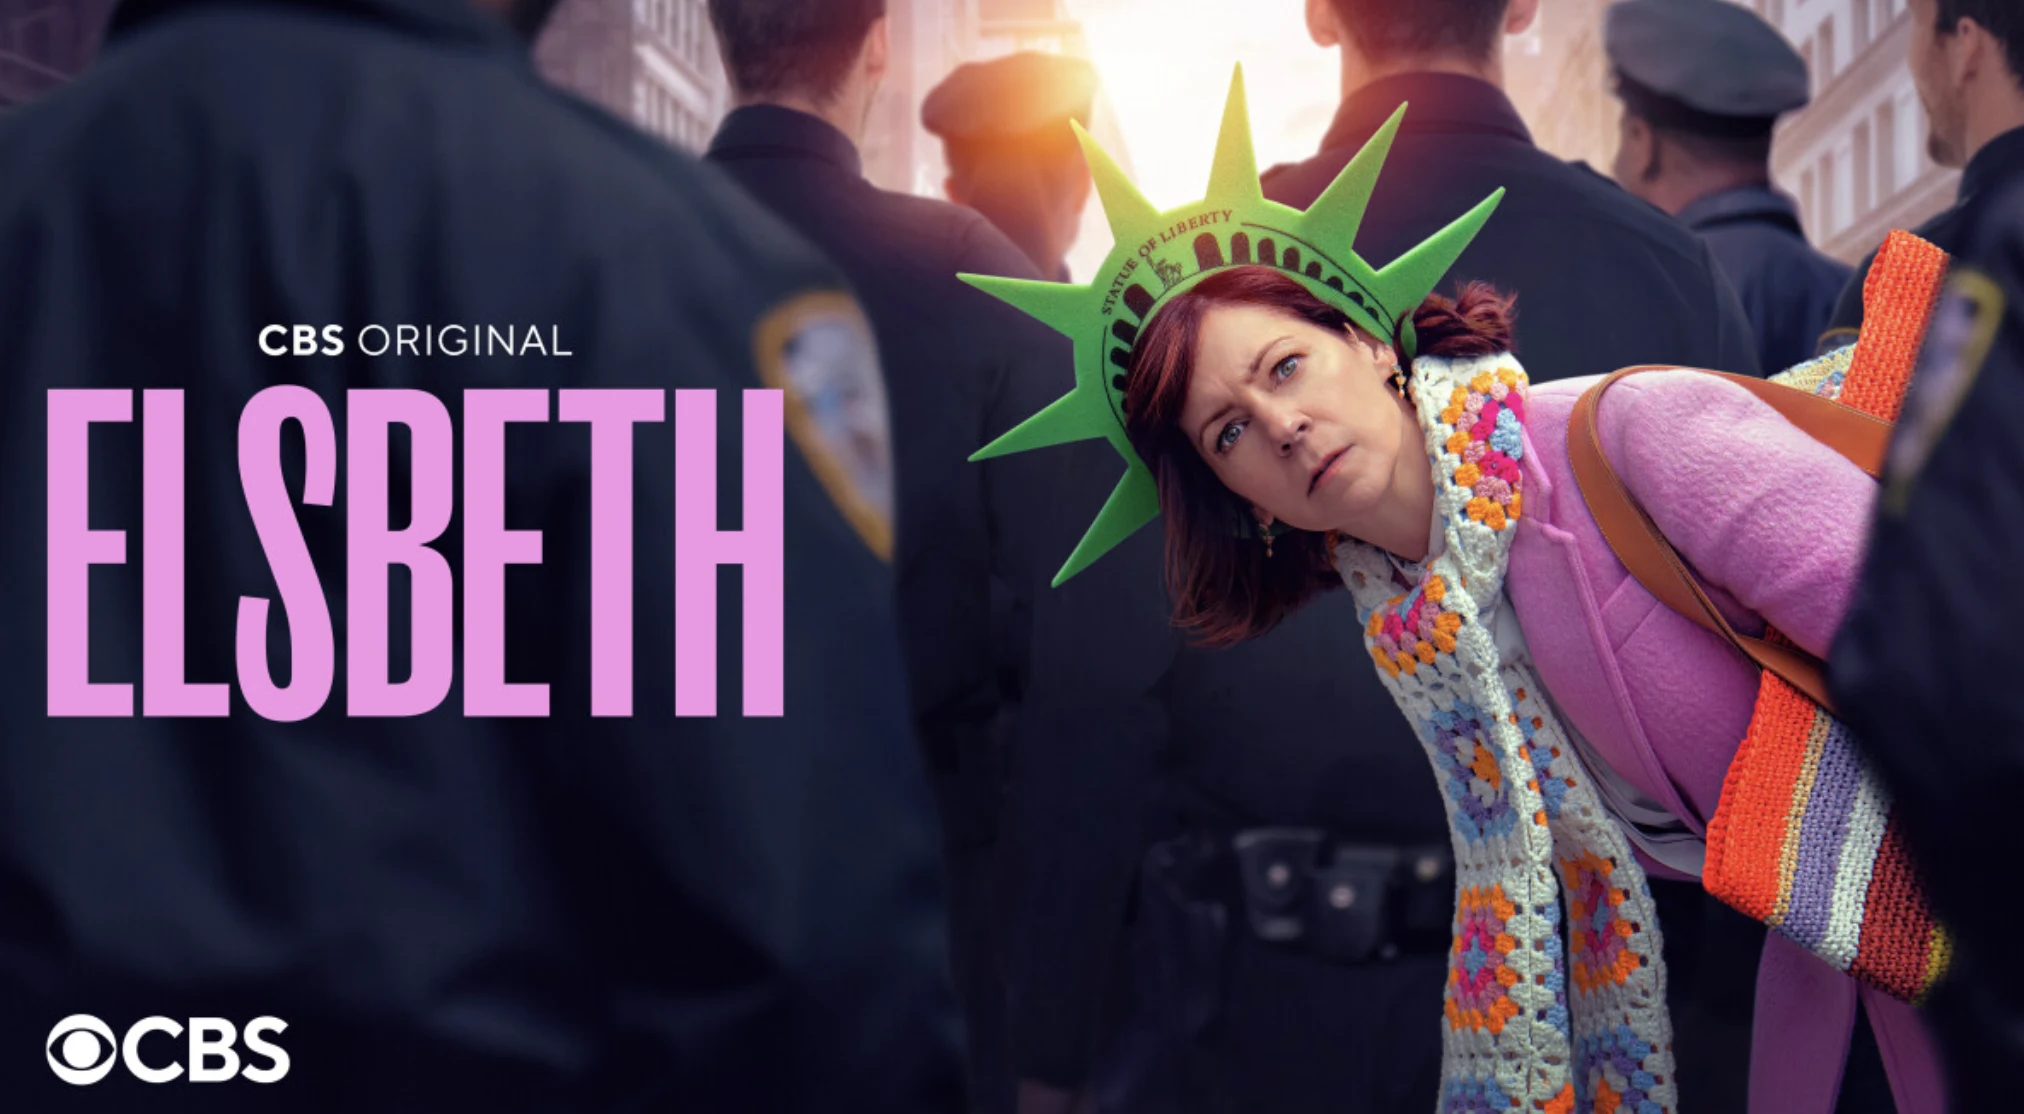 CBS Renews Critically Acclaimed Hit "Elsbeth" for Second Season